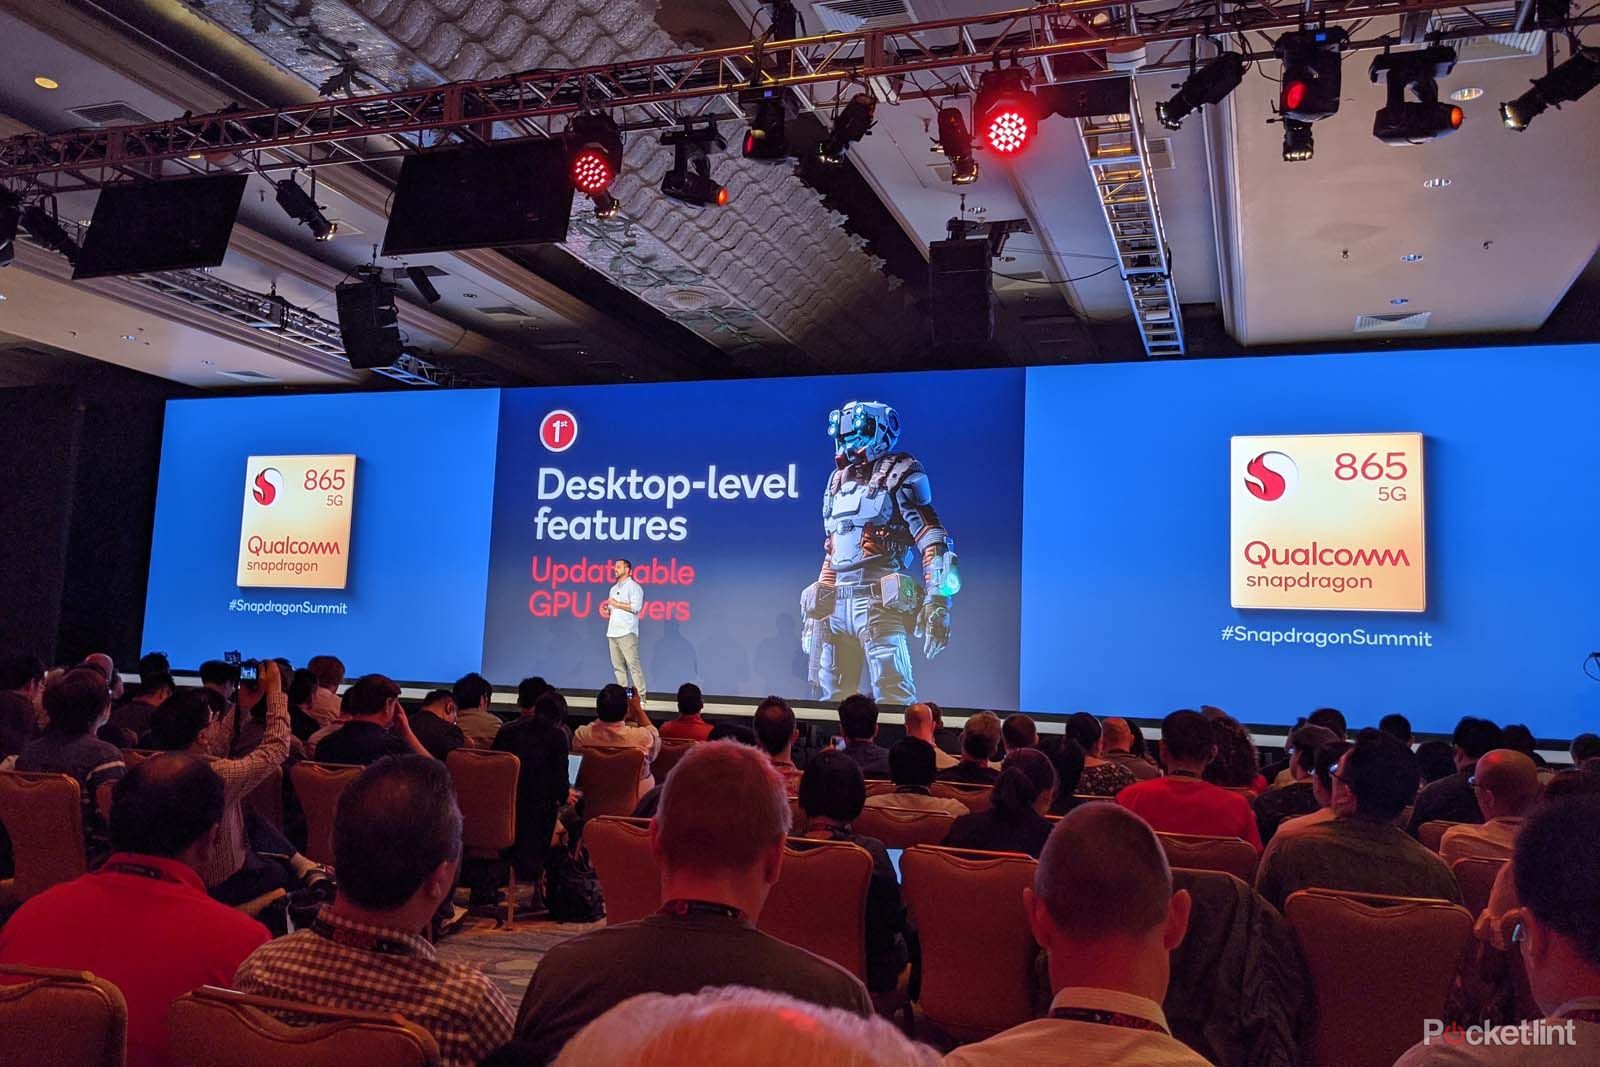 Qualcomm Snapdragon 865 will offer updatable GPU drivers to boost your mobile gaming image 1